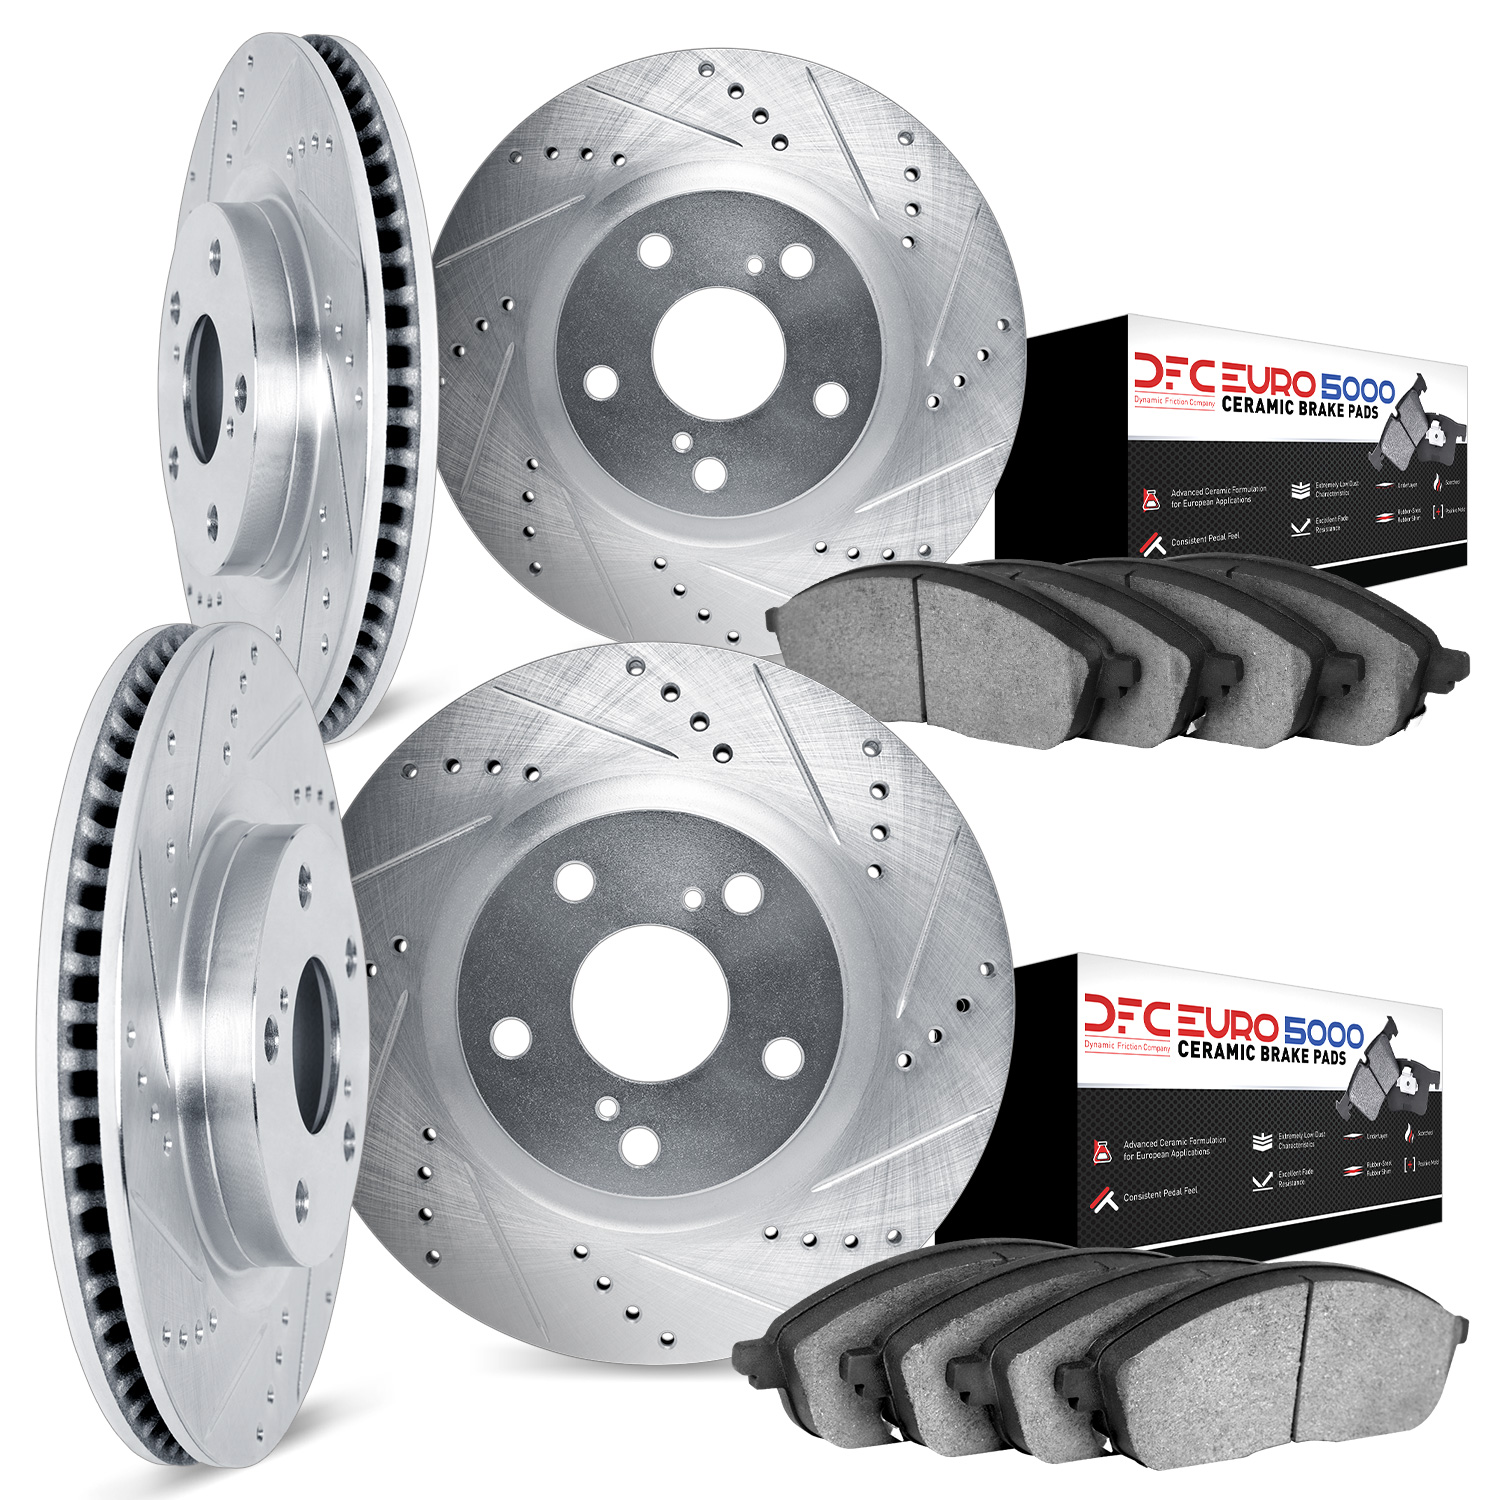 7604-31035 Drilled/Slotted Brake Rotors w/5000 Euro Ceramic Brake Pads Kit [Silver], Fits Select BMW, Position: Front and Rear